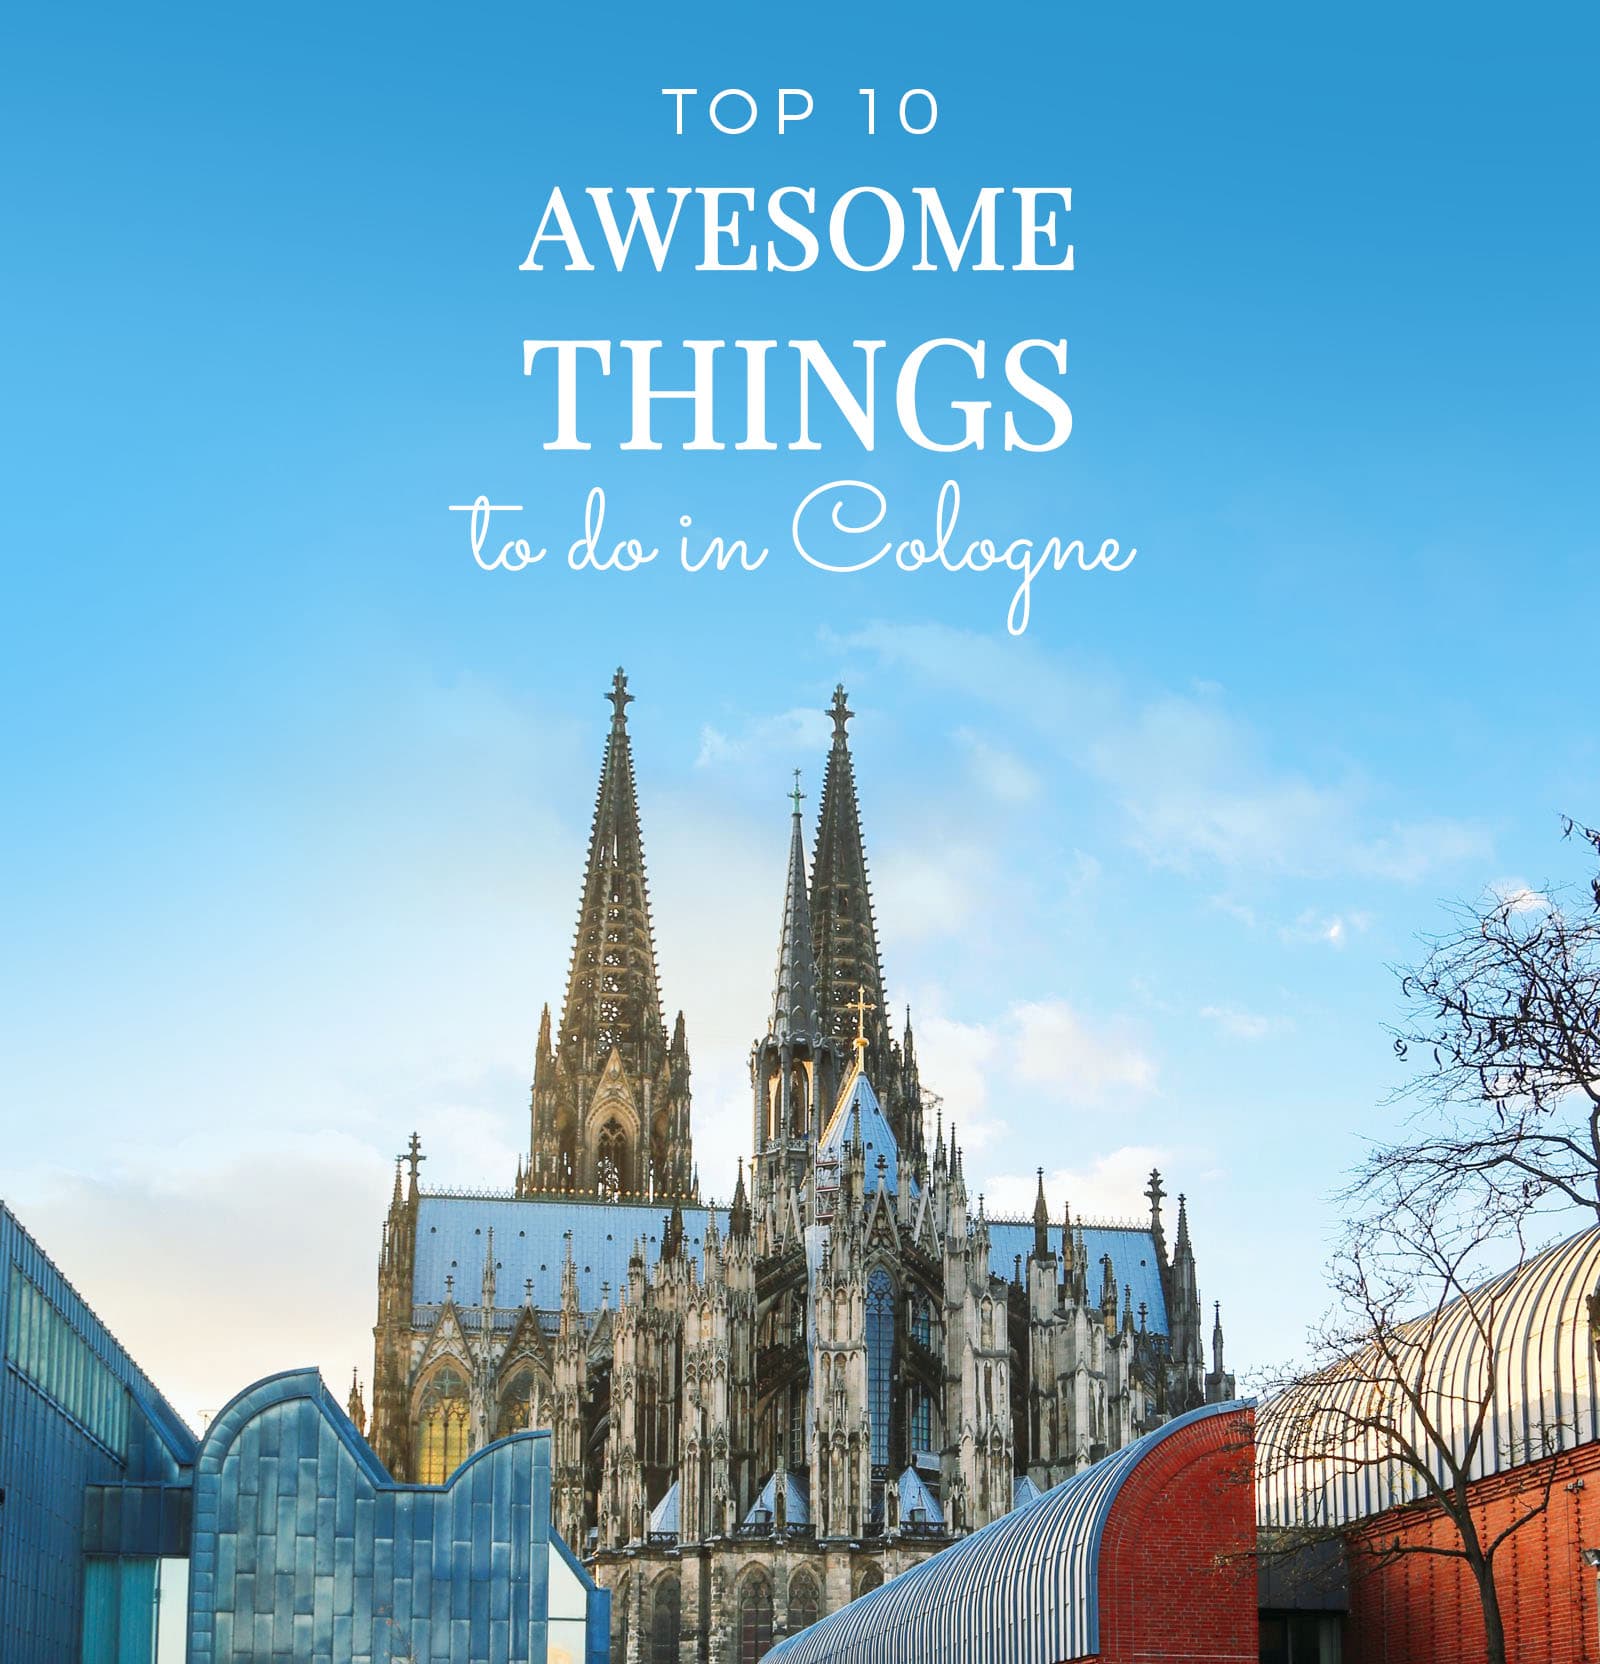 10 awesome things to do in Cologne